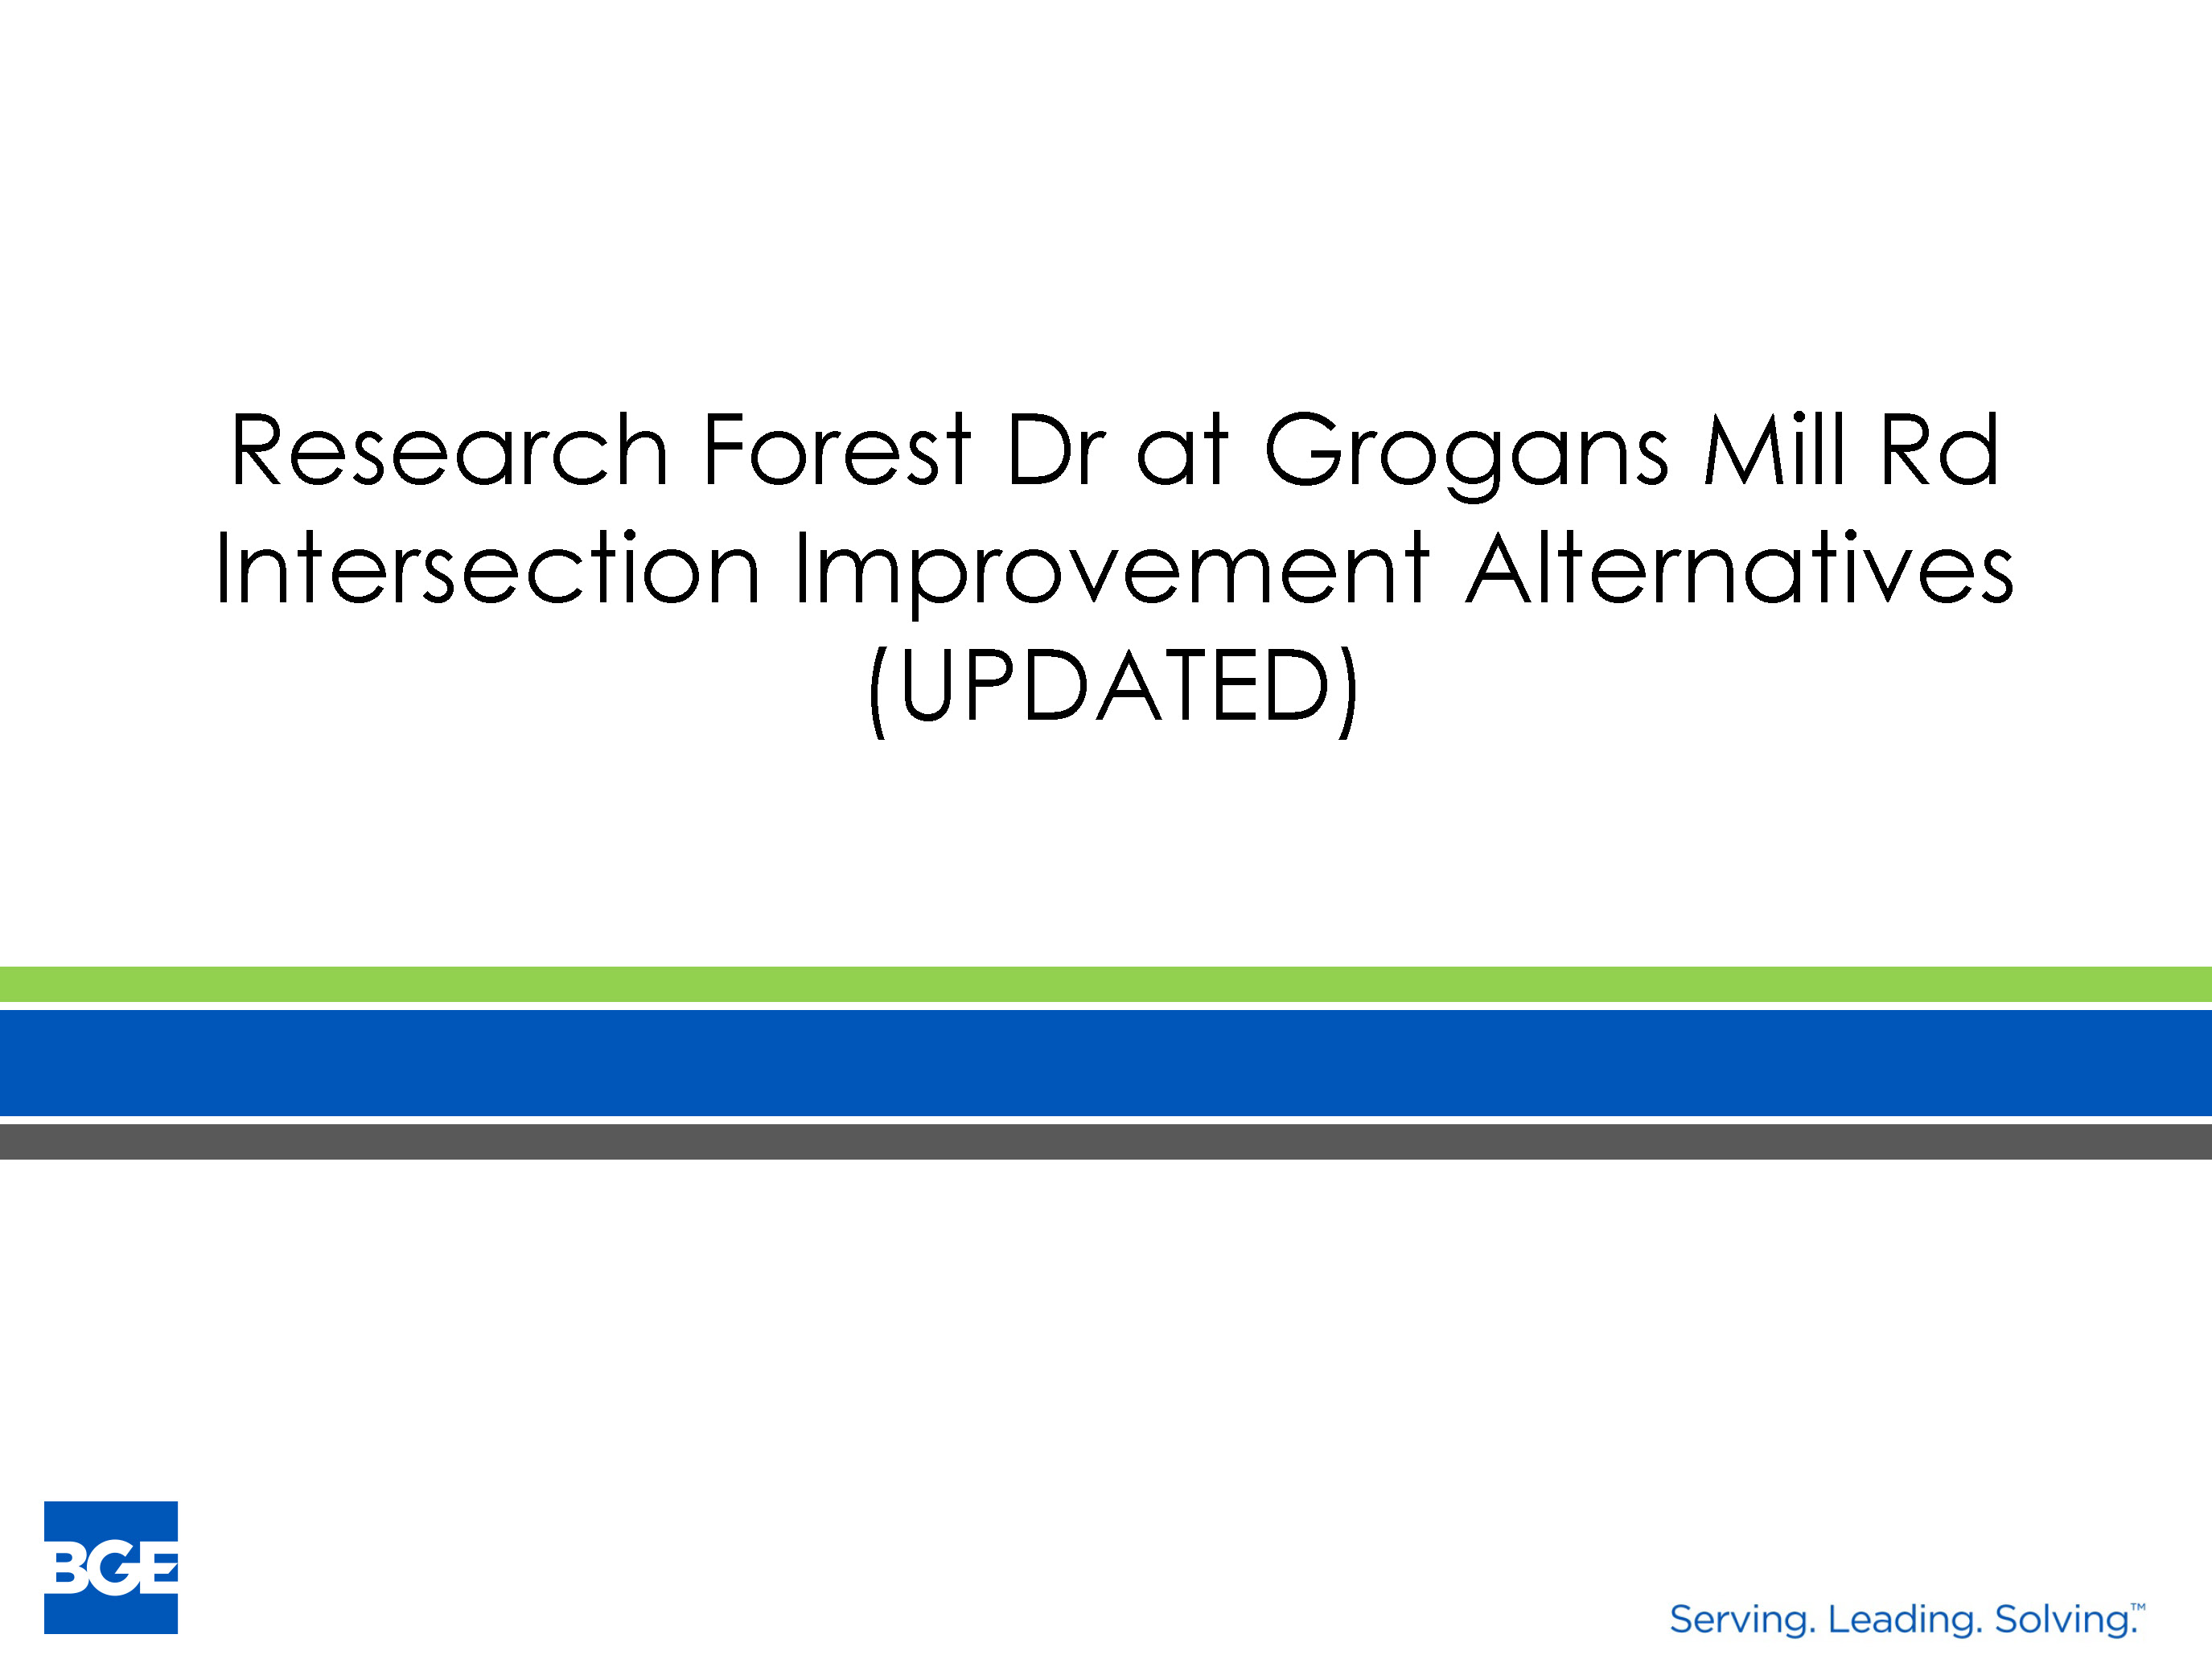 Research Forest Drive at Grogans Mill Road intersection improvement alternatives | Precinct 3